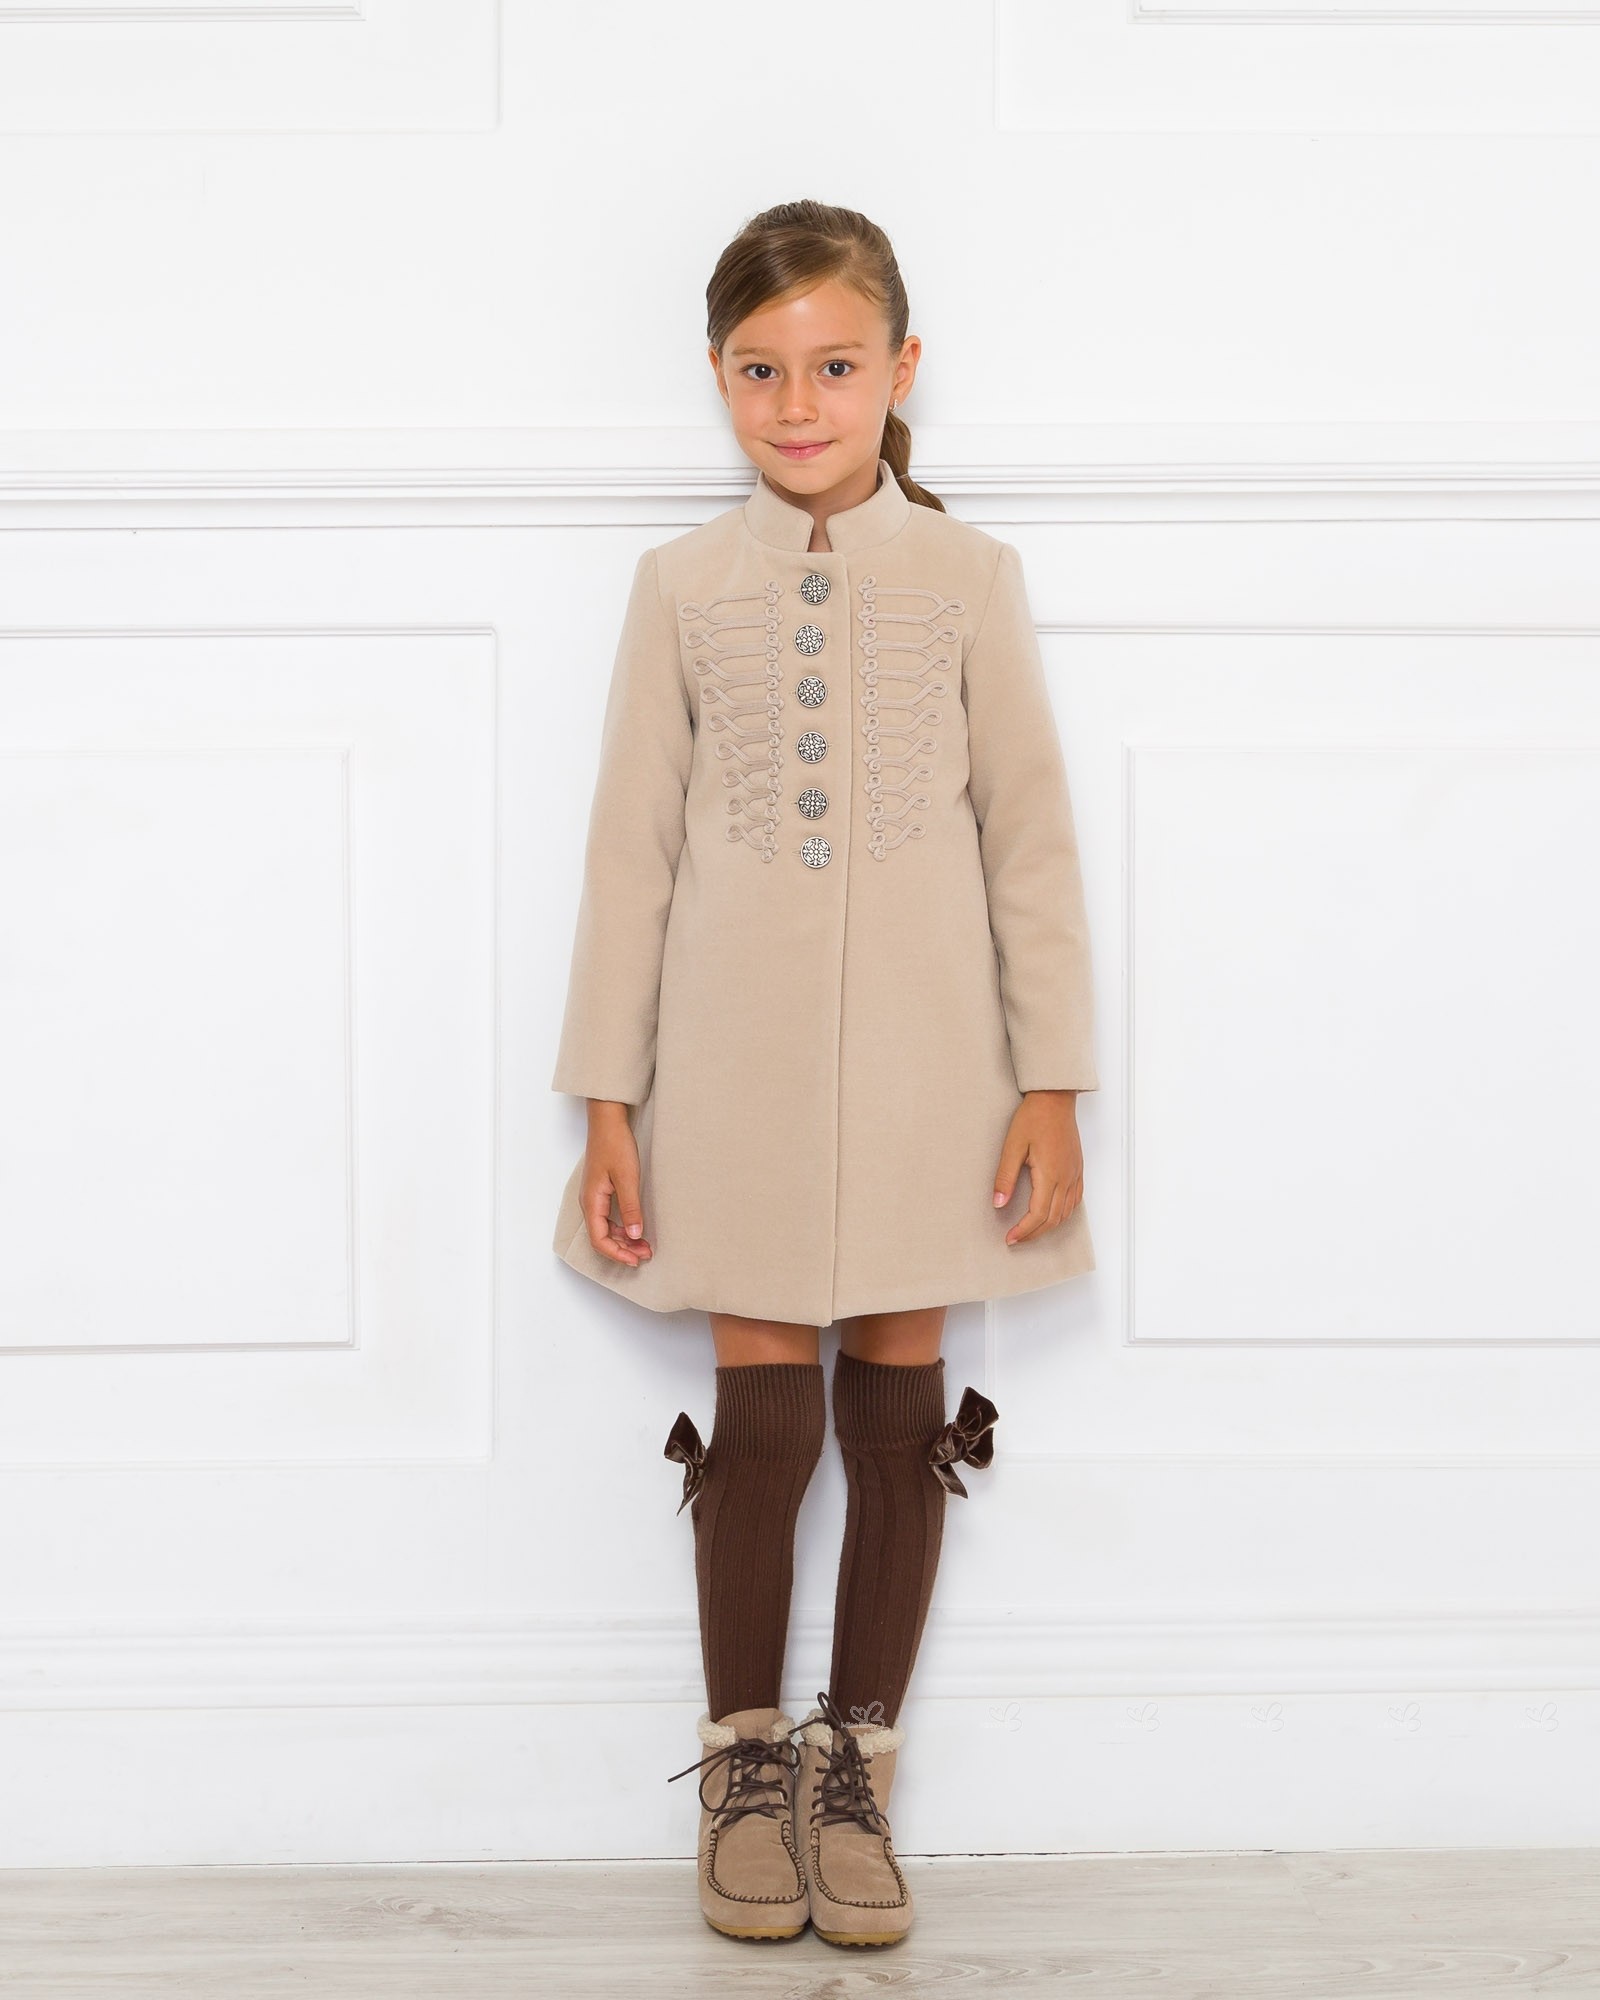 Girls Beige Suede Mohican Boots Outfit | Missbaby